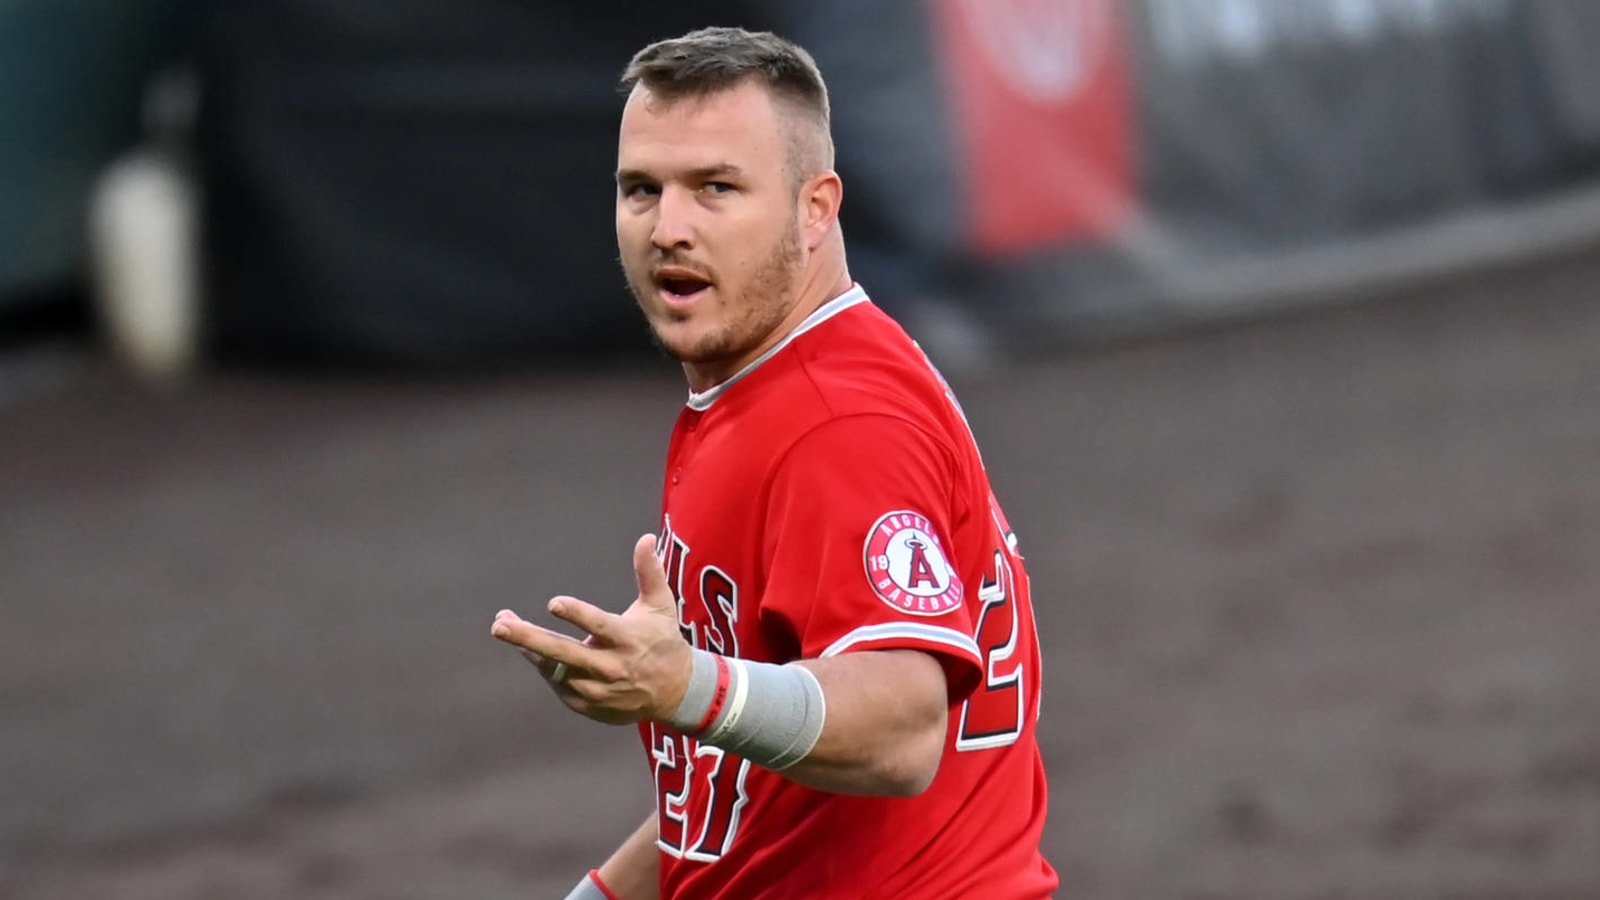 MLB execs: Mike Trout is the 'best player on the planet'